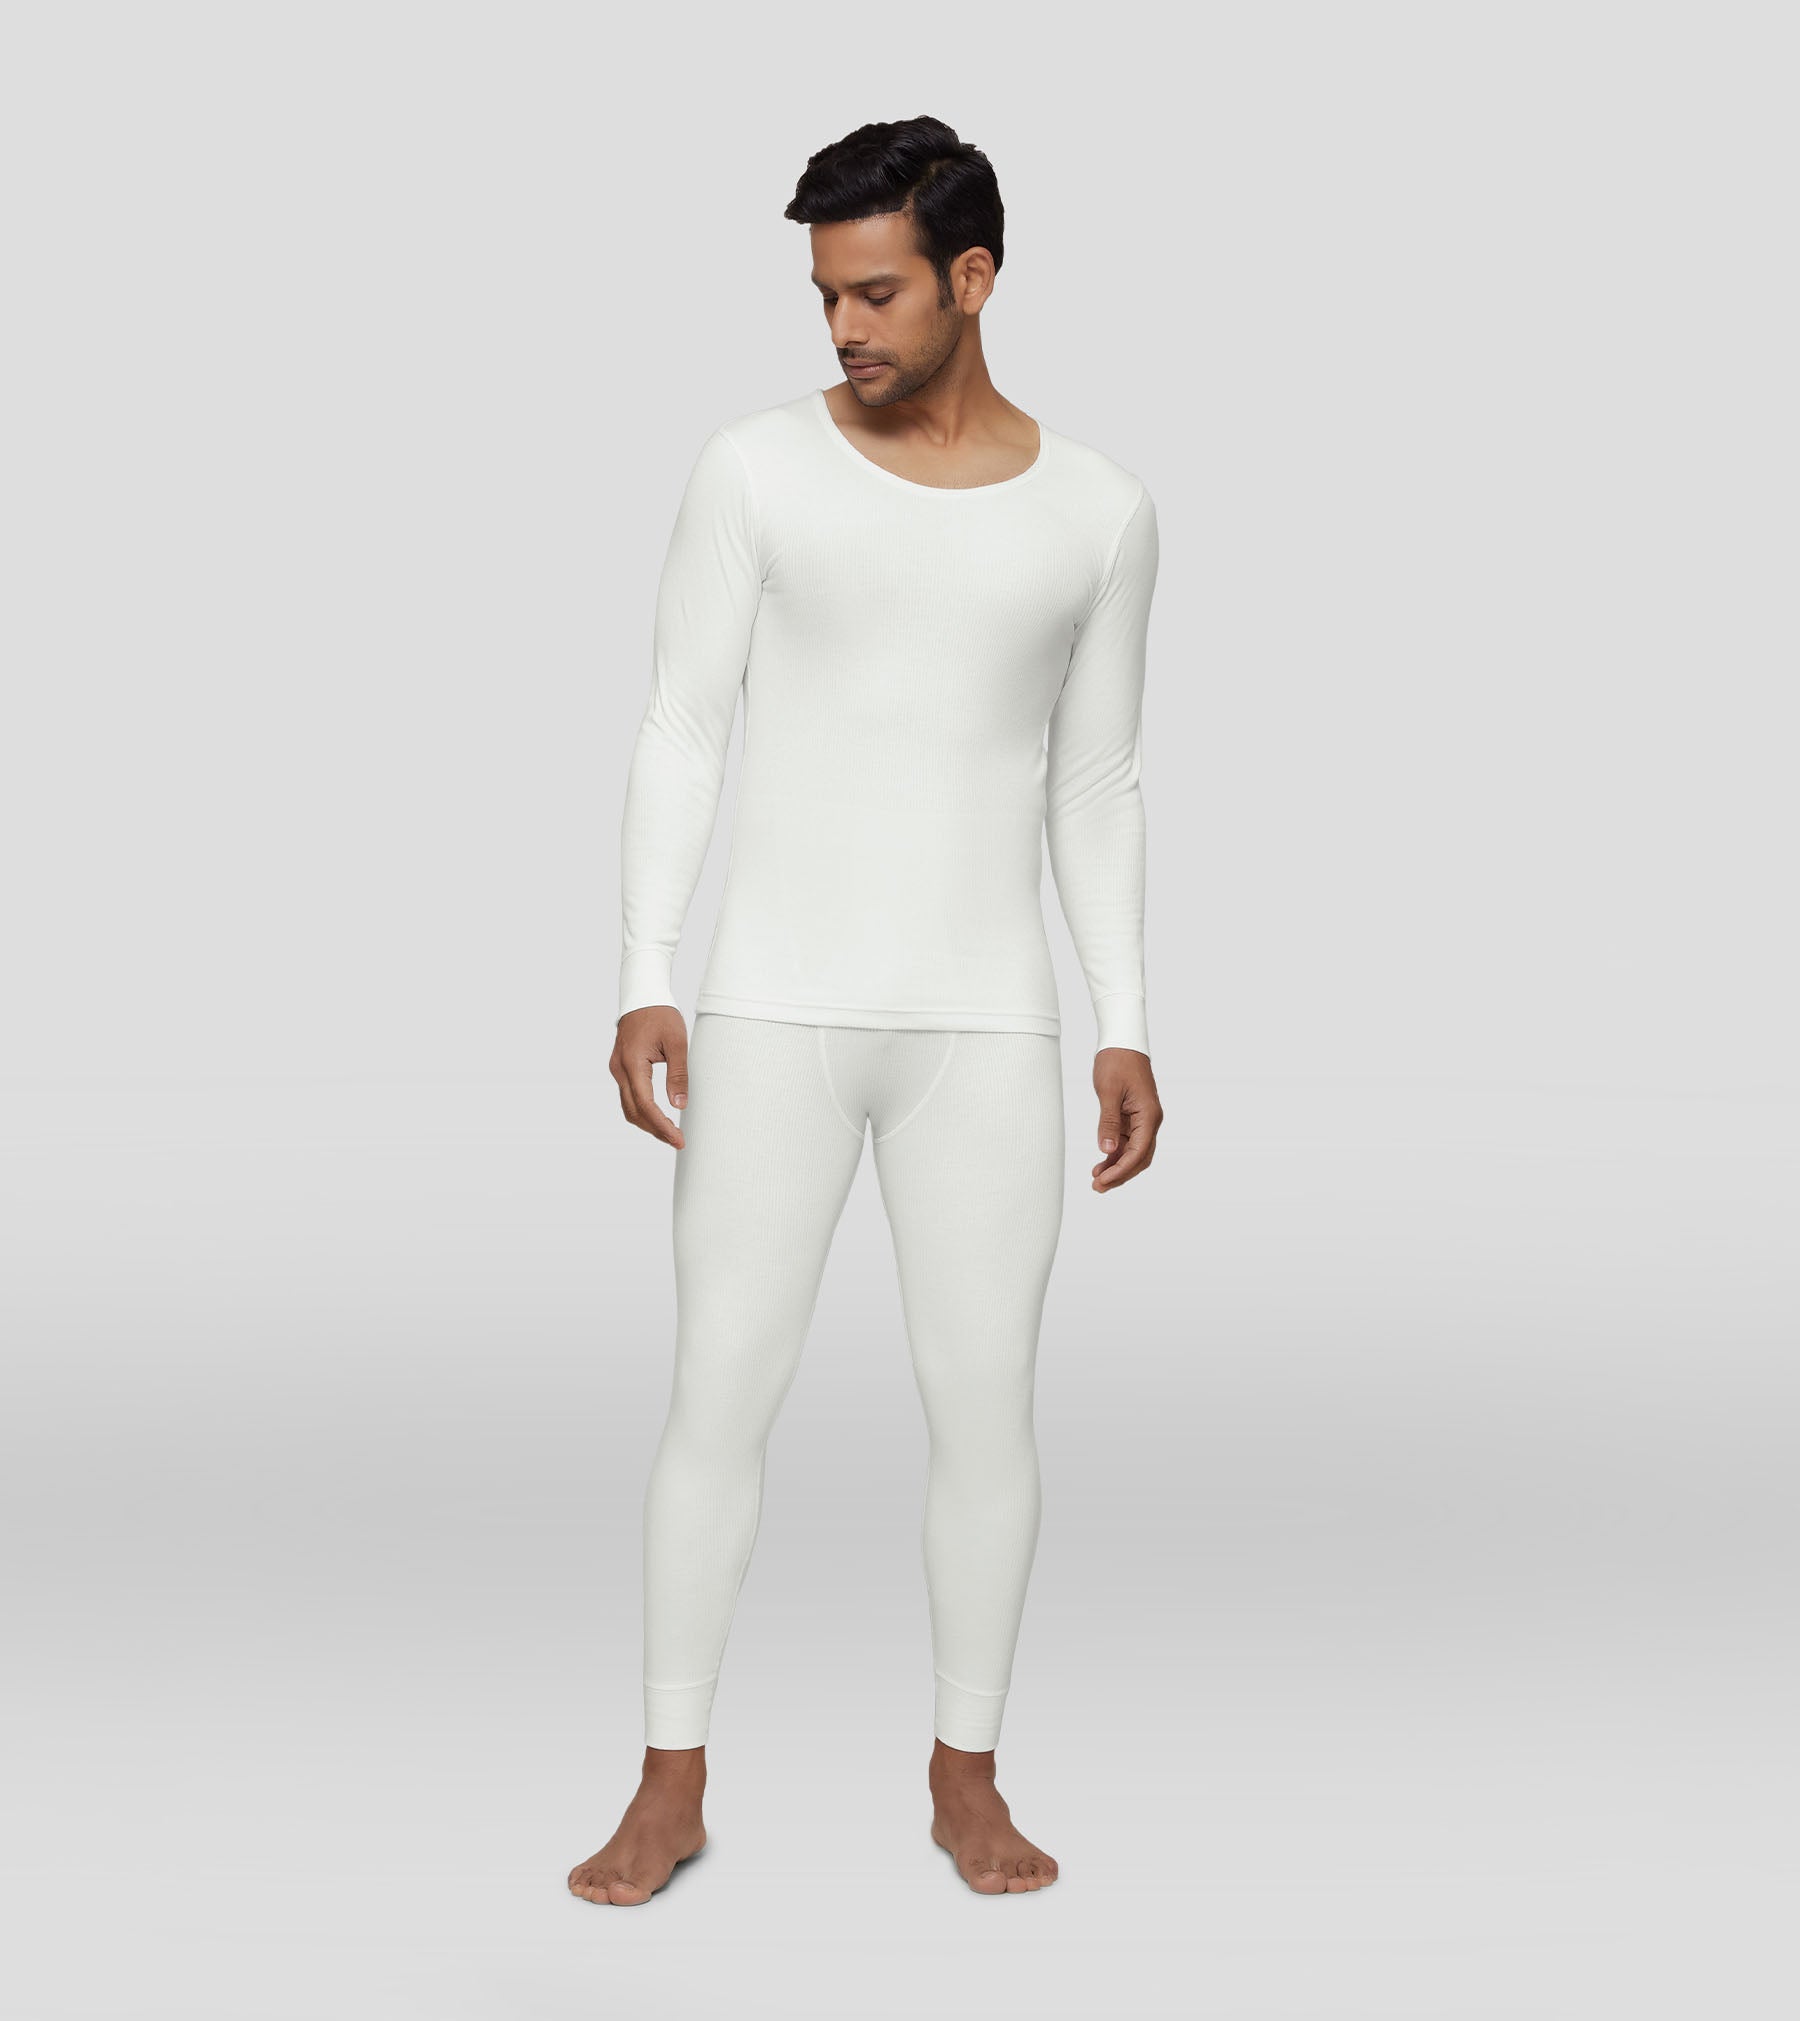 2022 Winter Thermal Underwear for Men Clothing Tops and Pants Sets